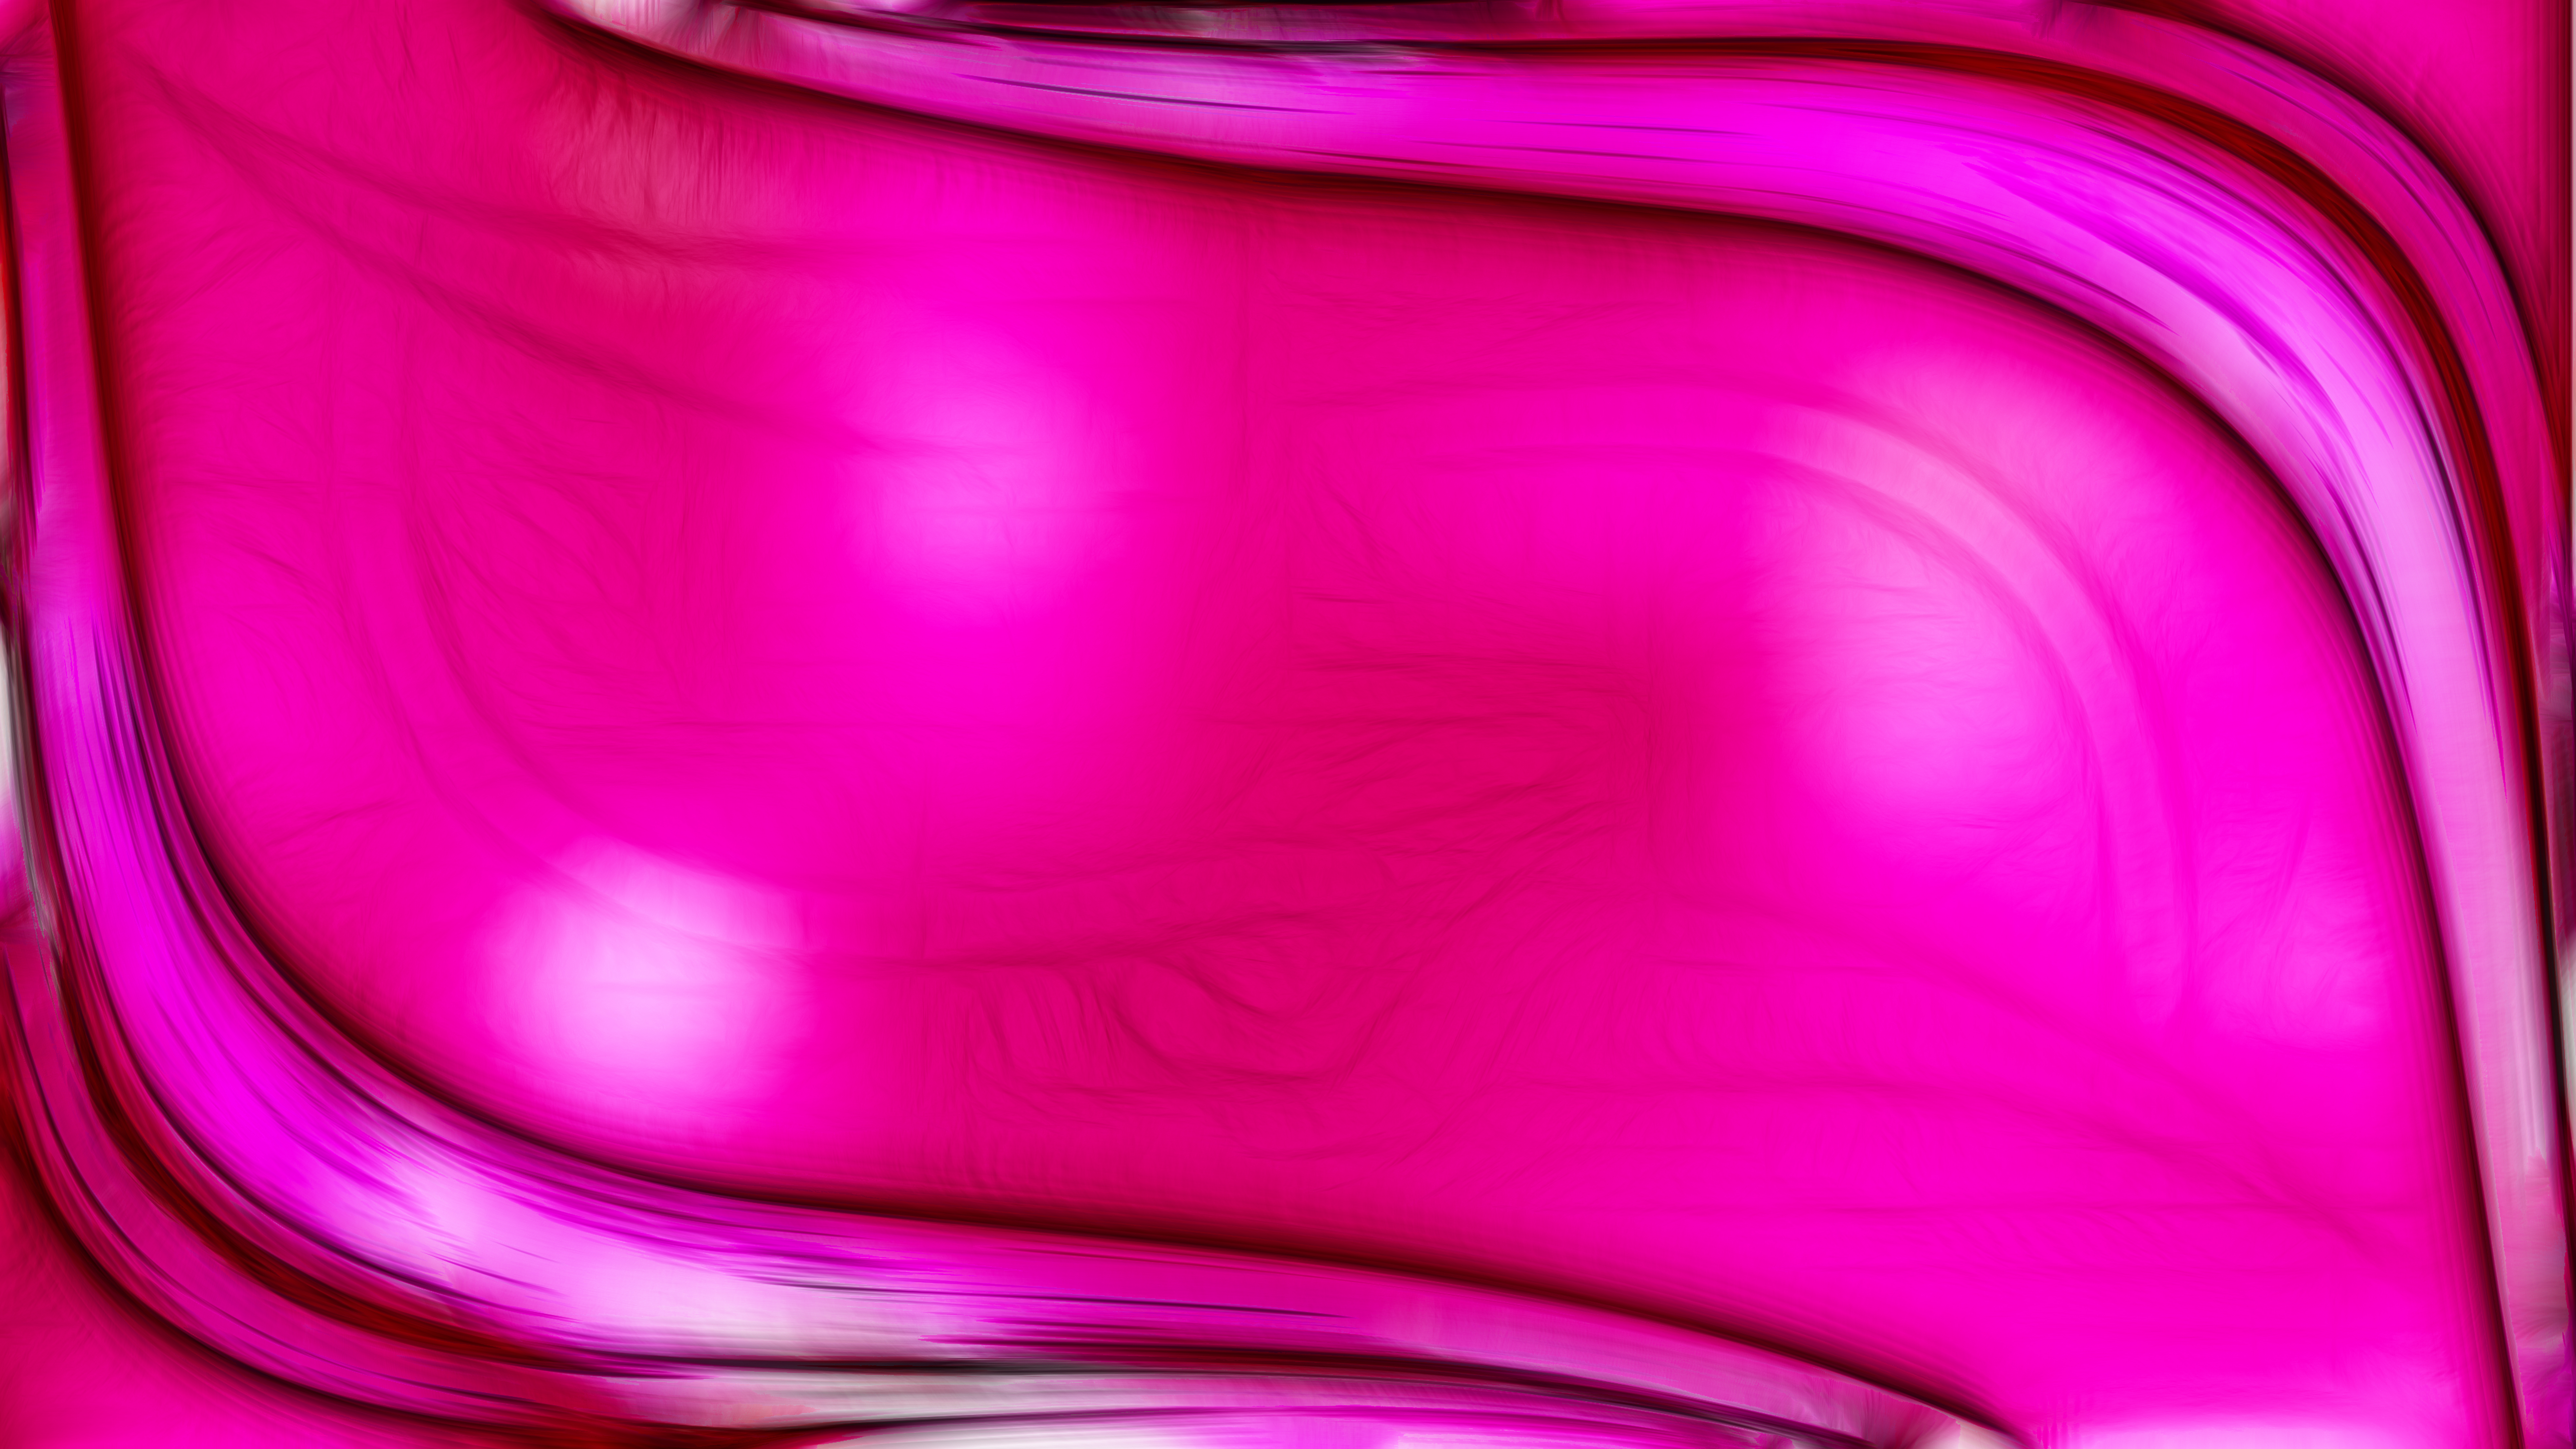 Free Hot Pink Background Texture